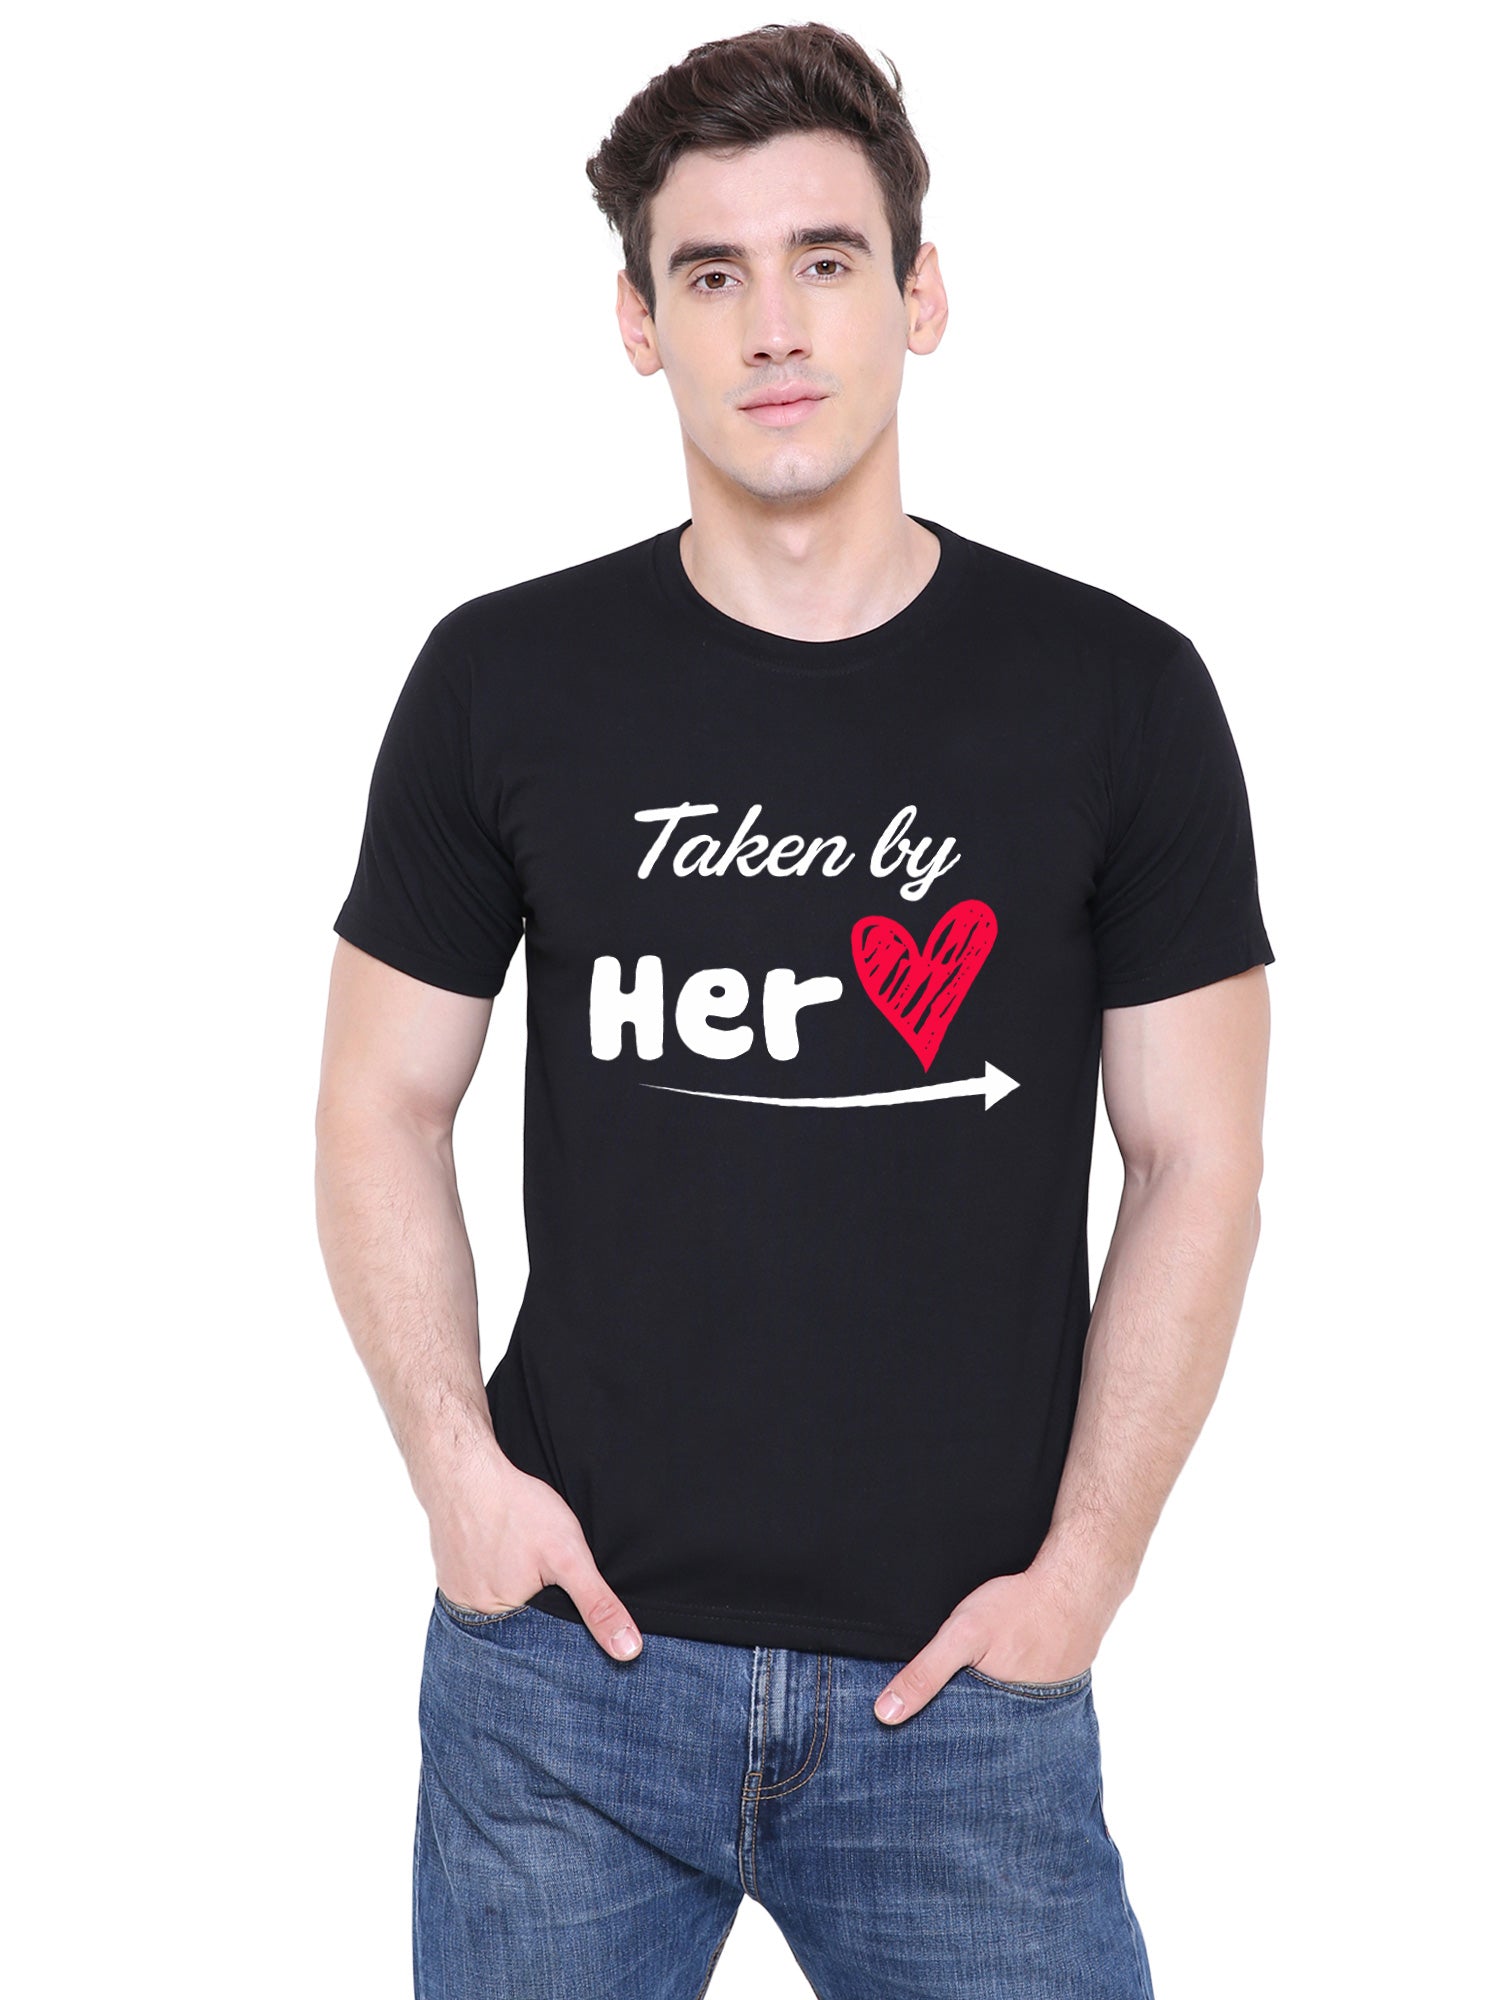 Taken by her Reserved by him matching Couple T shirts- Black